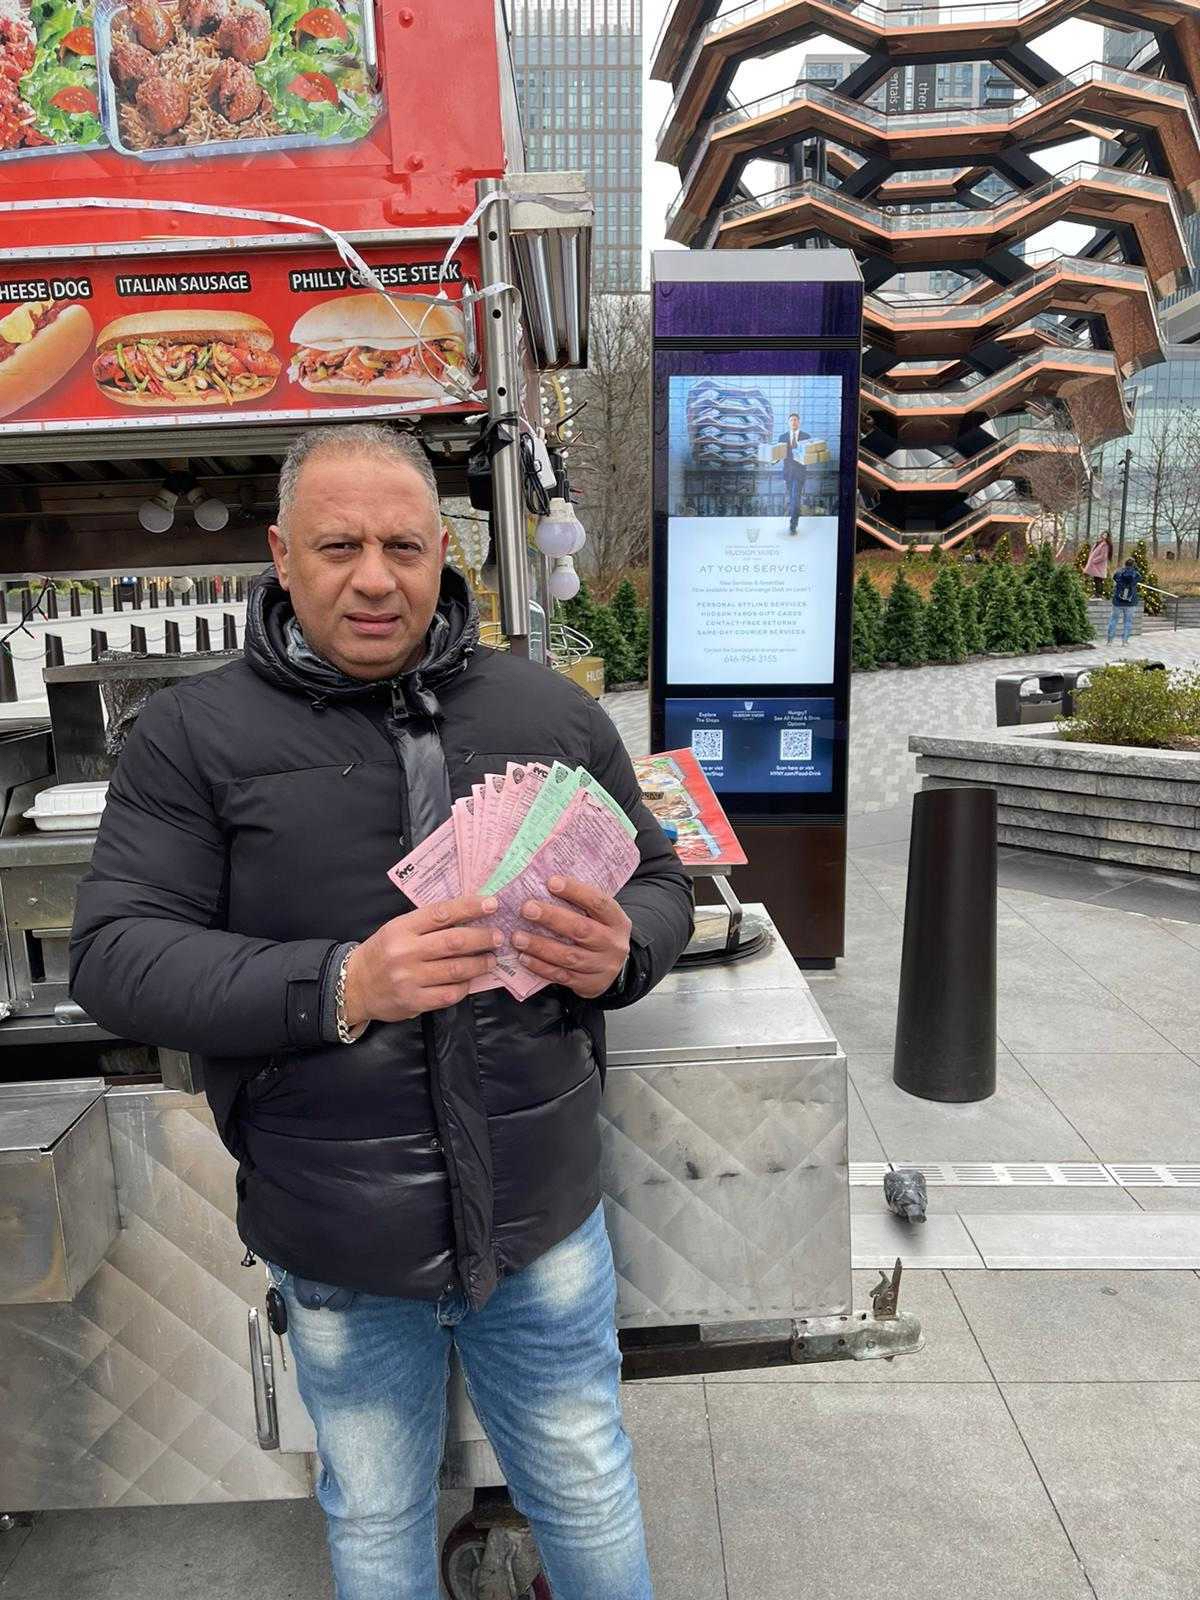 Street Vending Tickets Went Up During First Year of New